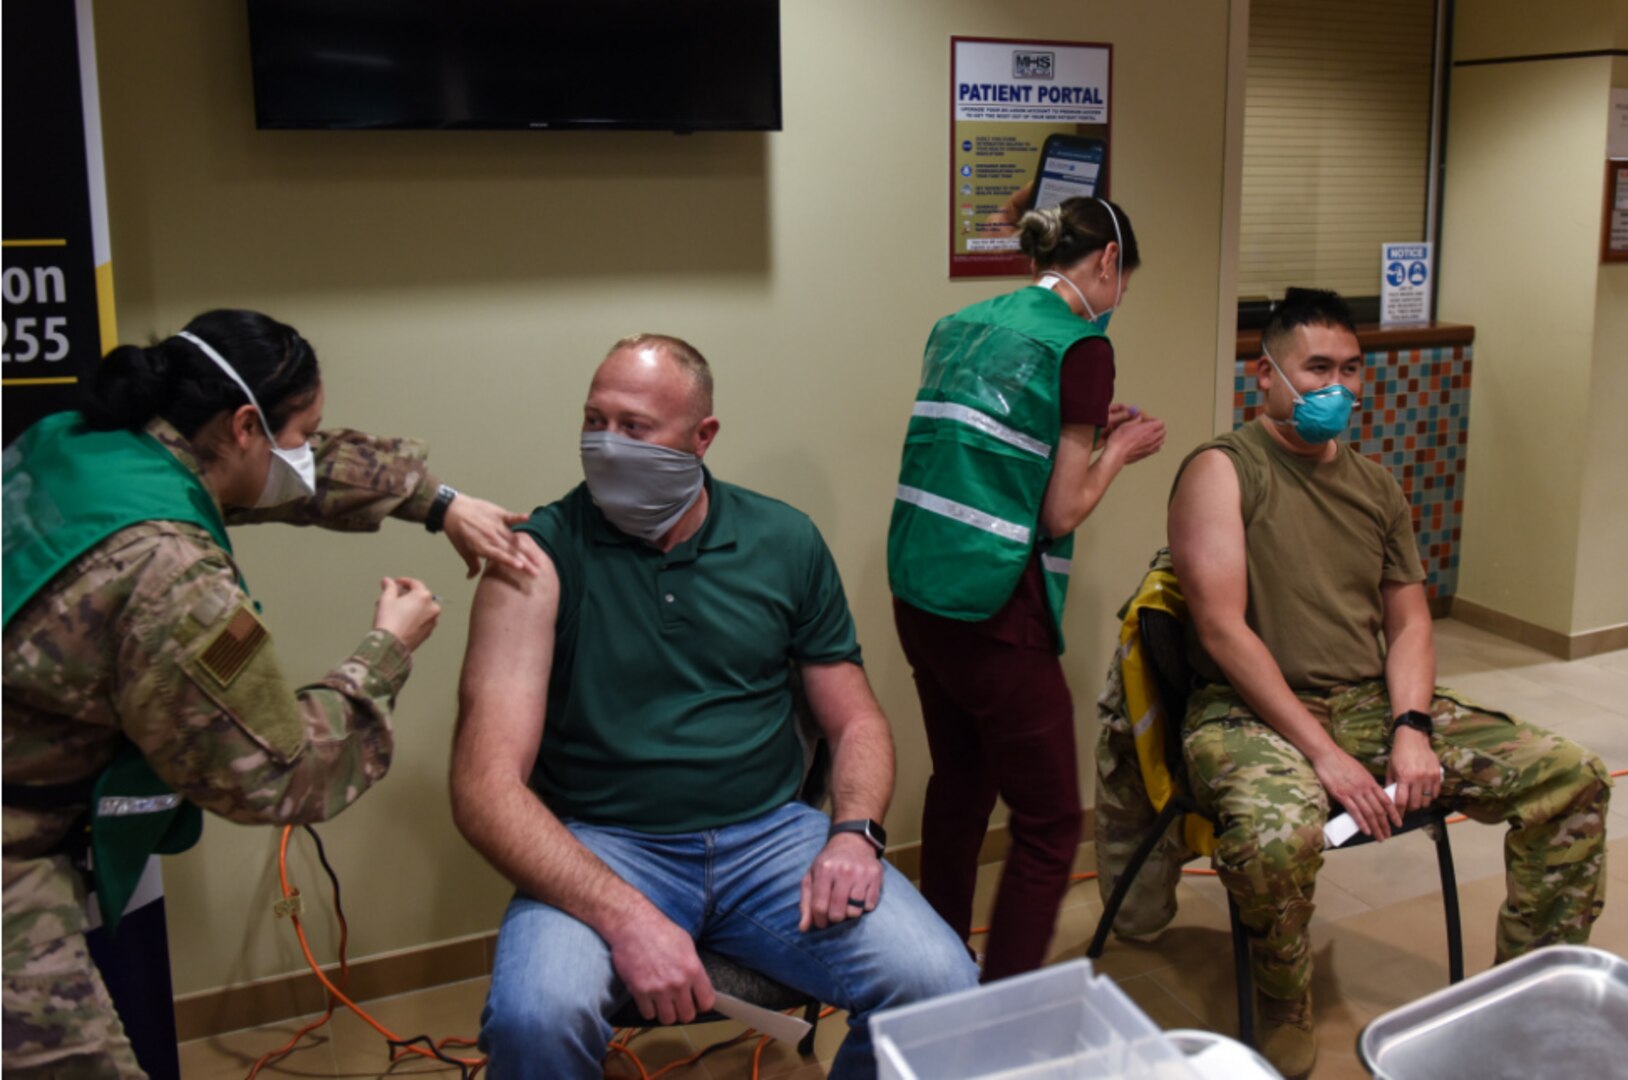 James Haleski, 30th Civil Engineer Squadron chief of readiness and emergency management, and Dr. Paul Vu, 30th Medical Group chief of aerospace medicine, receive COVID-19 vaccinations, Jan. 6, 2021, Vandenberg Air Force Base, Calif.